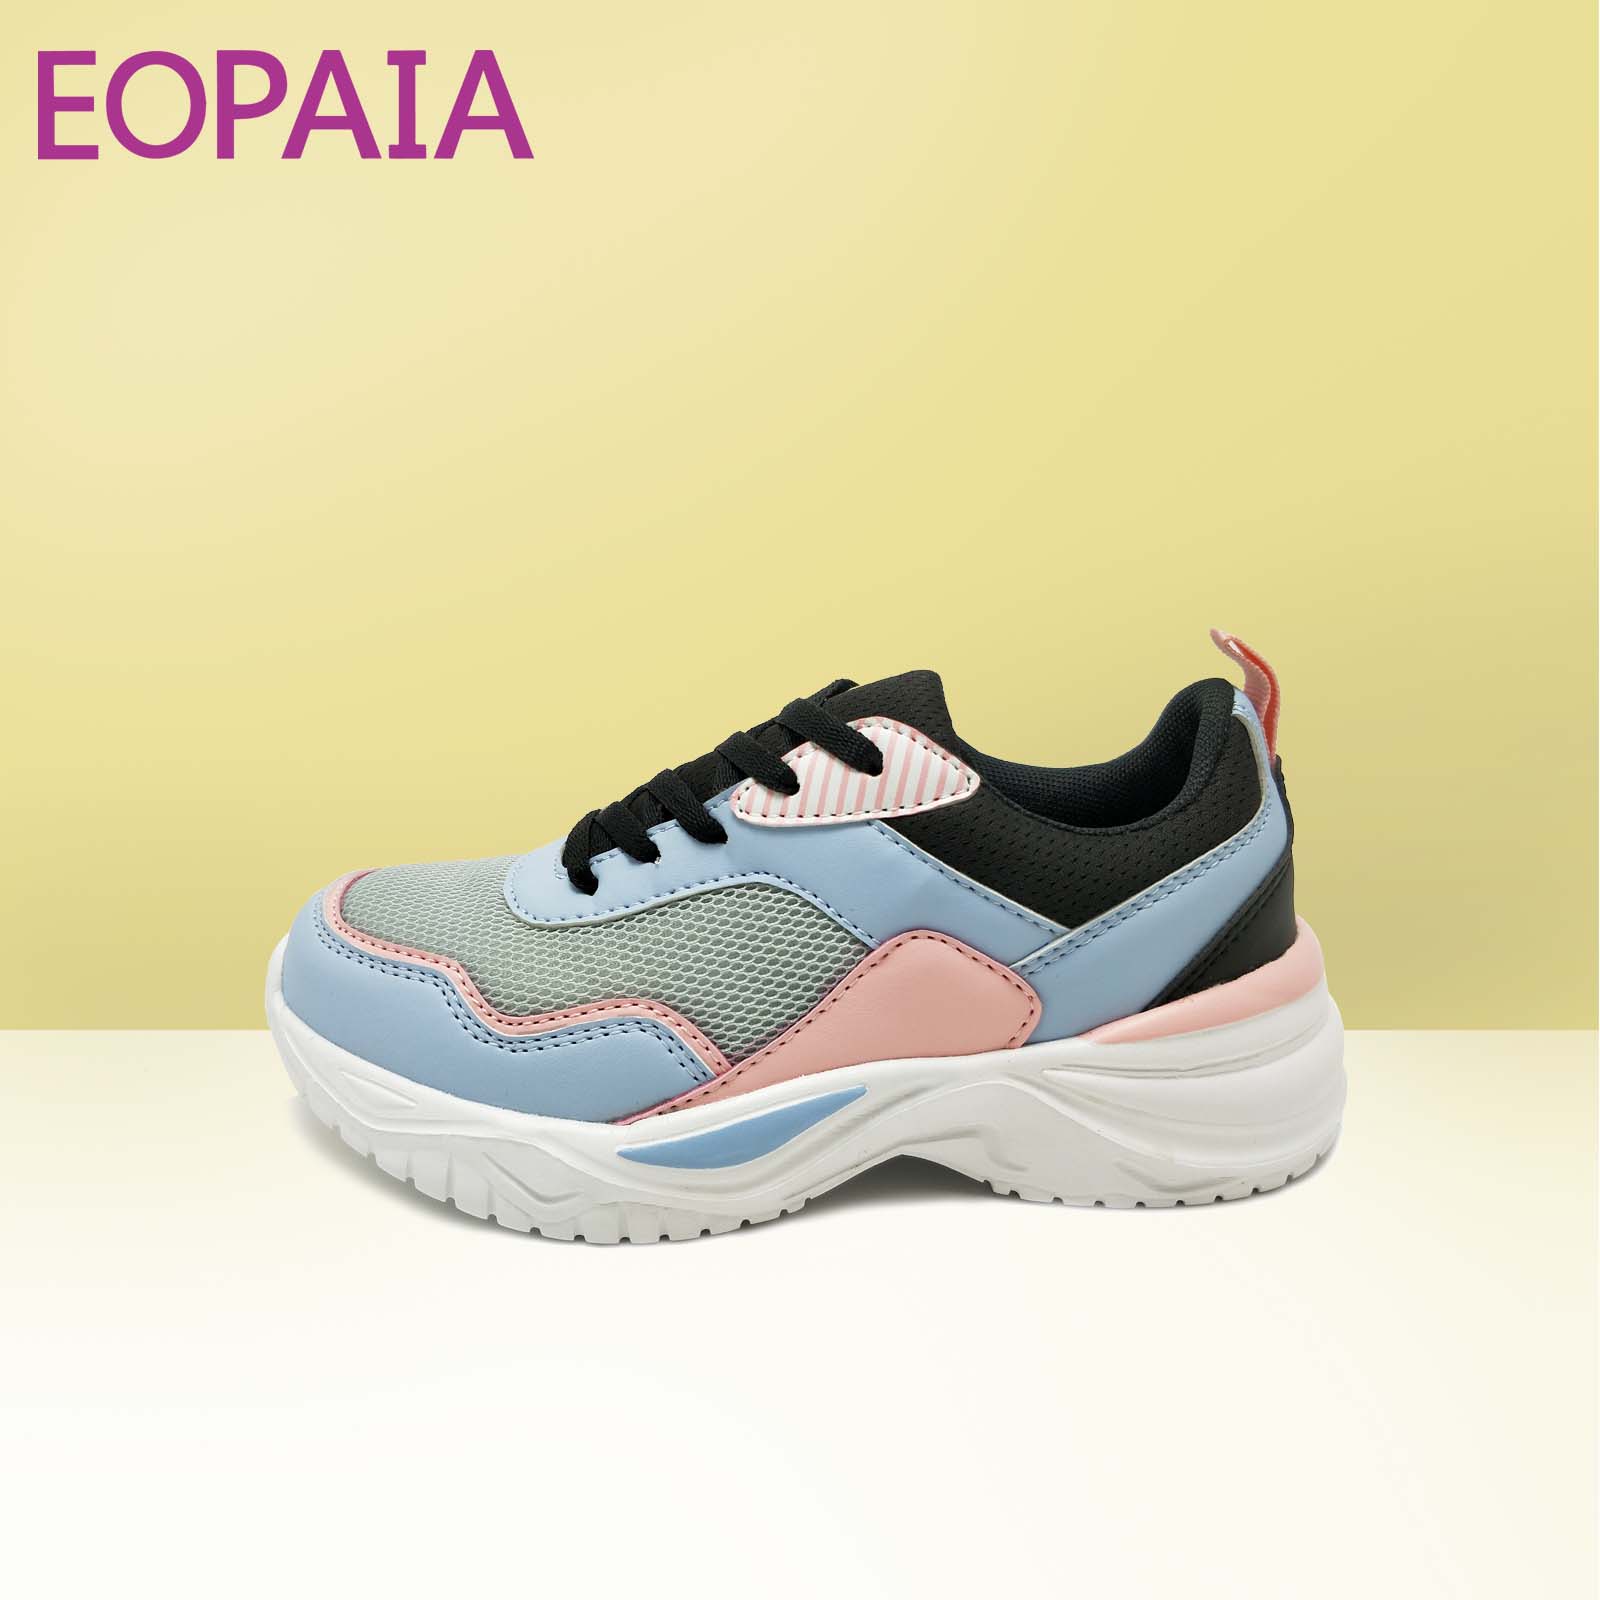 chaussures enfants chaussures enfants enfants casual chaussures enfants chaussures sport chaussures entraîneur confortable chaussures confortables jeunesse sneaker fille chaussures